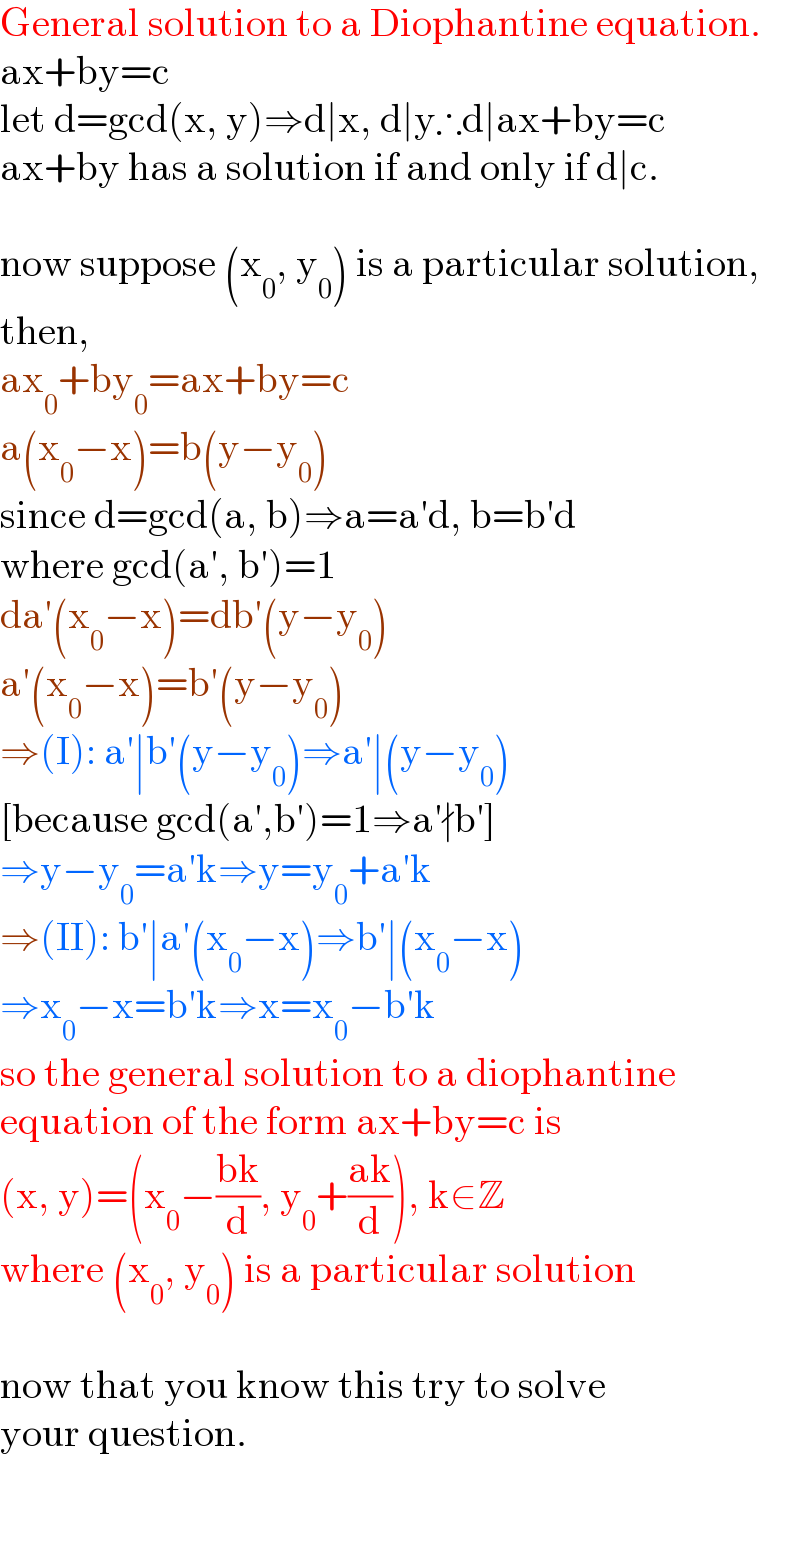 General solution to a Diophantine equation.  ax+by=c  let d=gcd(x, y)⇒d∣x, d∣y∴d∣ax+by=c  ax+by has a solution if and only if d∣c.    now suppose (x_0 , y_0 ) is a particular solution,  then,   ax_0 +by_0 =ax+by=c  a(x_0 −x)=b(y−y_0 )  since d=gcd(a, b)⇒a=a′d, b=b′d  where gcd(a′, b′)=1  da′(x_0 −x)=db′(y−y_0 )  a′(x_0 −x)=b′(y−y_0 )  ⇒(I): a′∣b′(y−y_0 )⇒a′∣(y−y_0 )   [because gcd(a′,b′)=1⇒a′∤b′]  ⇒y−y_0 =a′k⇒y=y_0 +a′k  ⇒(II): b′∣a′(x_0 −x)⇒b′∣(x_0 −x)  ⇒x_0 −x=b′k⇒x=x_0 −b′k  so the general solution to a diophantine  equation of the form ax+by=c is  (x, y)=(x_0 −((bk)/d), y_0 +((ak)/d)), k∈Z  where (x_0 , y_0 ) is a particular solution    now that you know this try to solve  your question.    